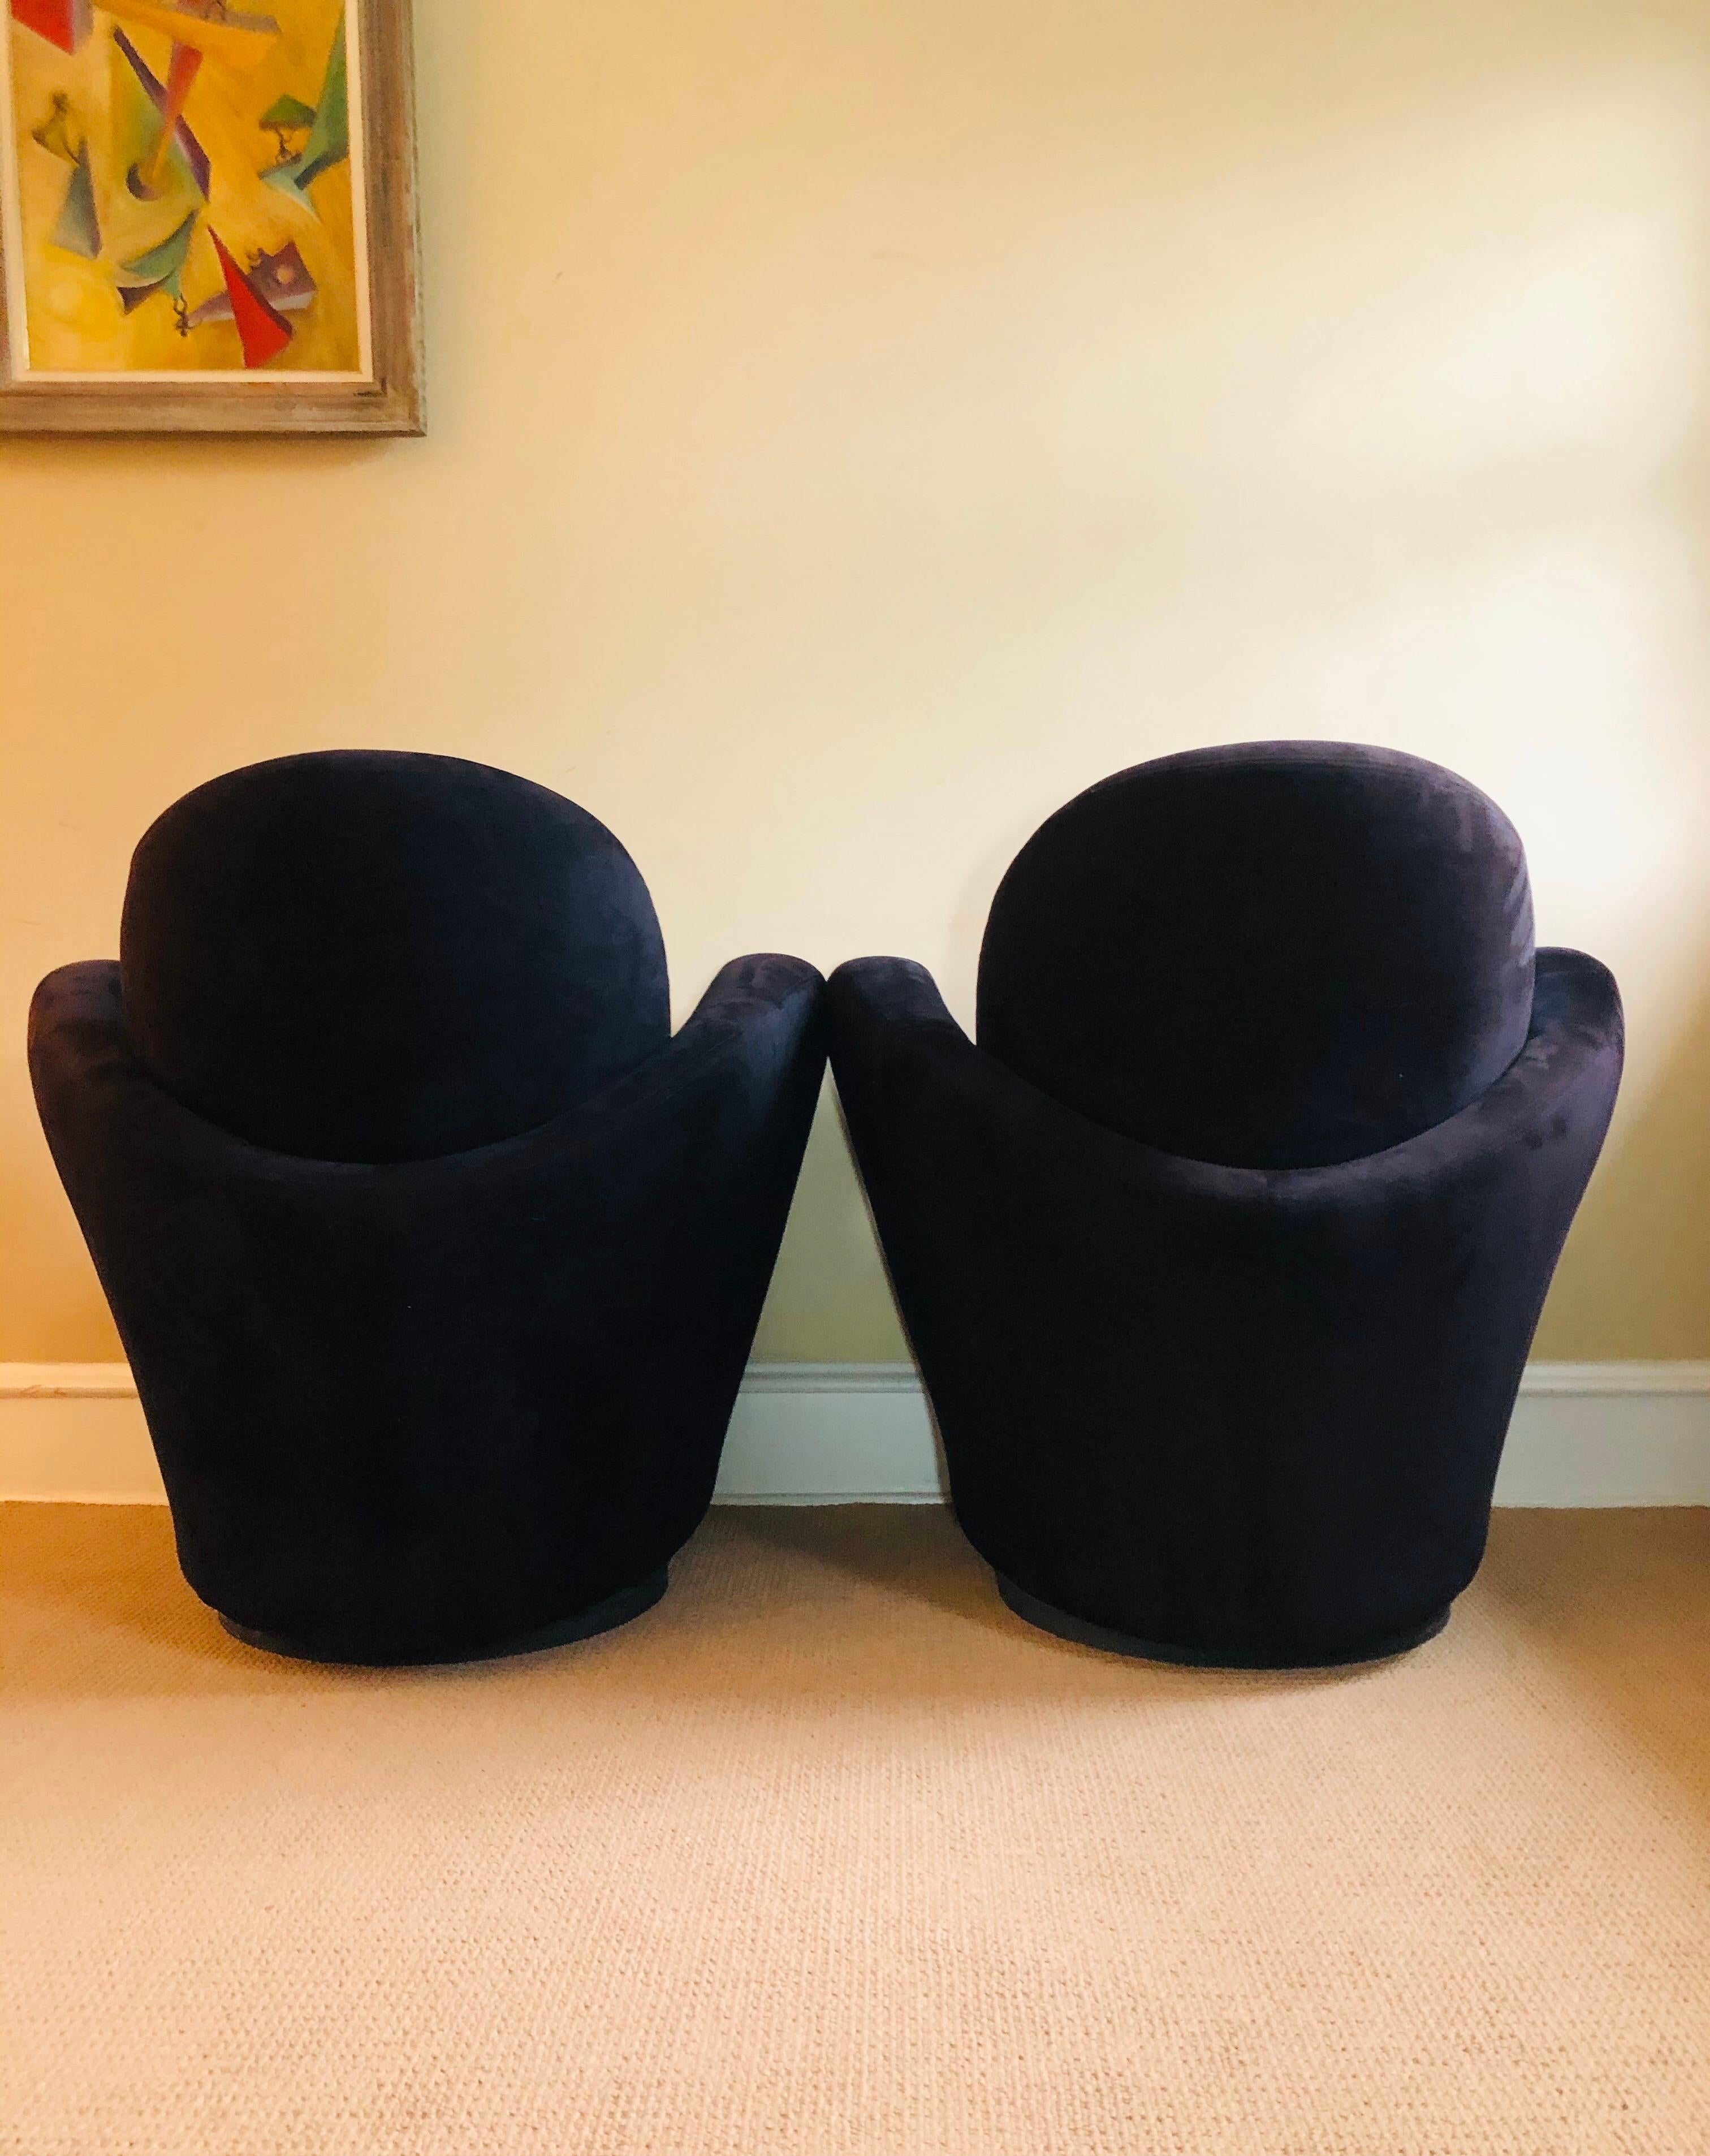 These beauties are in truly excellent condition, with essentially no wear to upholstery, circa 1997. They swivel smoothly and quietly. Extremely comfortable. Deco lines. Some of the finest chairs we have seen.

Please message for a private shipping